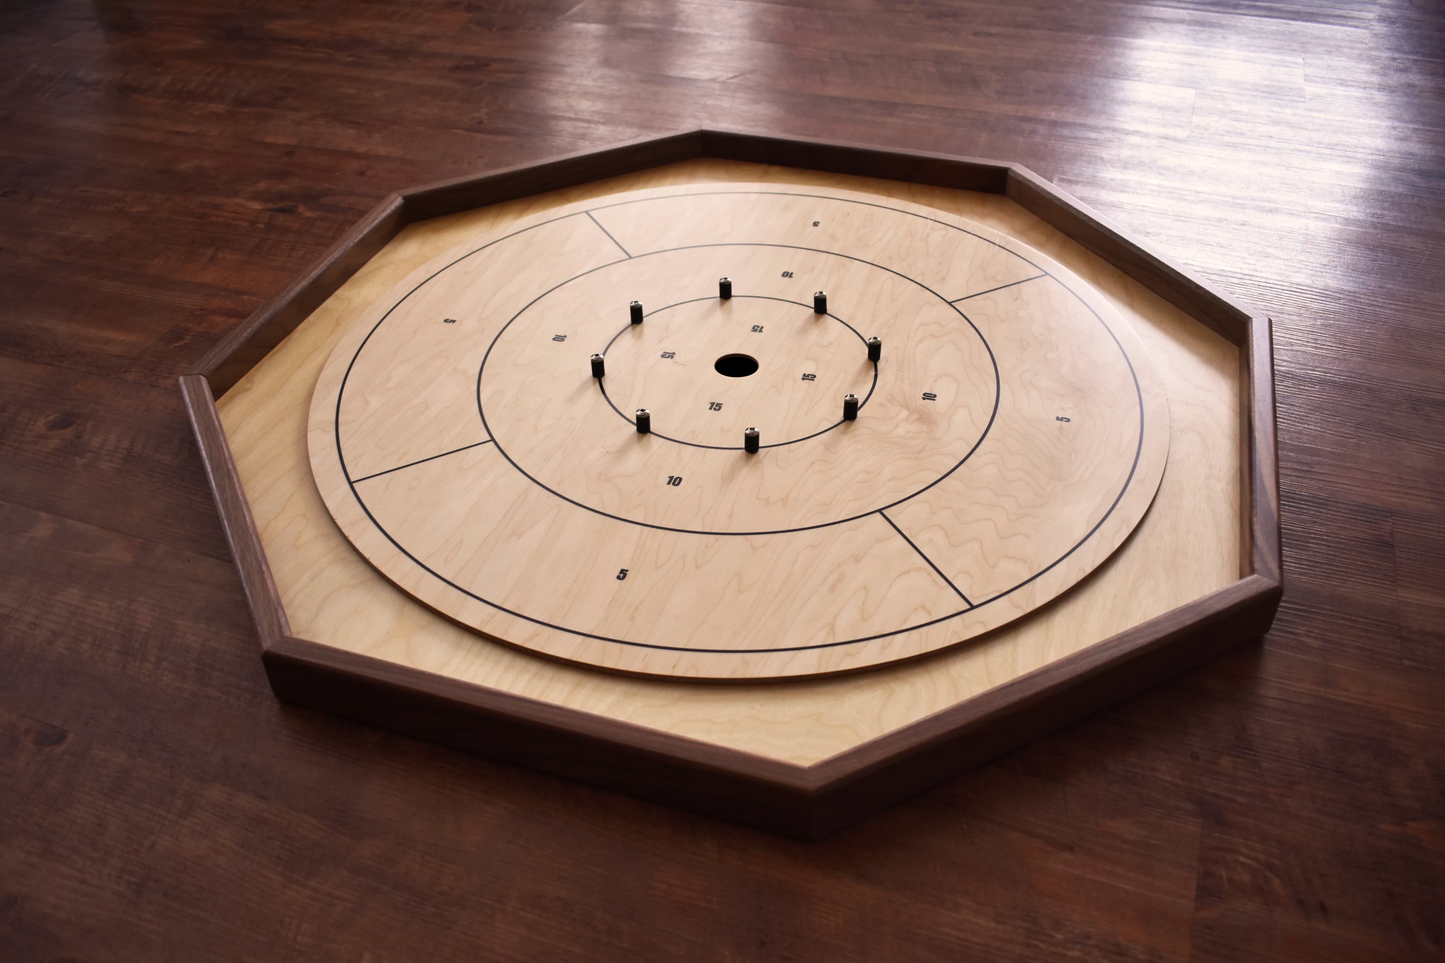 The Deluxe Traditional Crokinole Board Game Kit